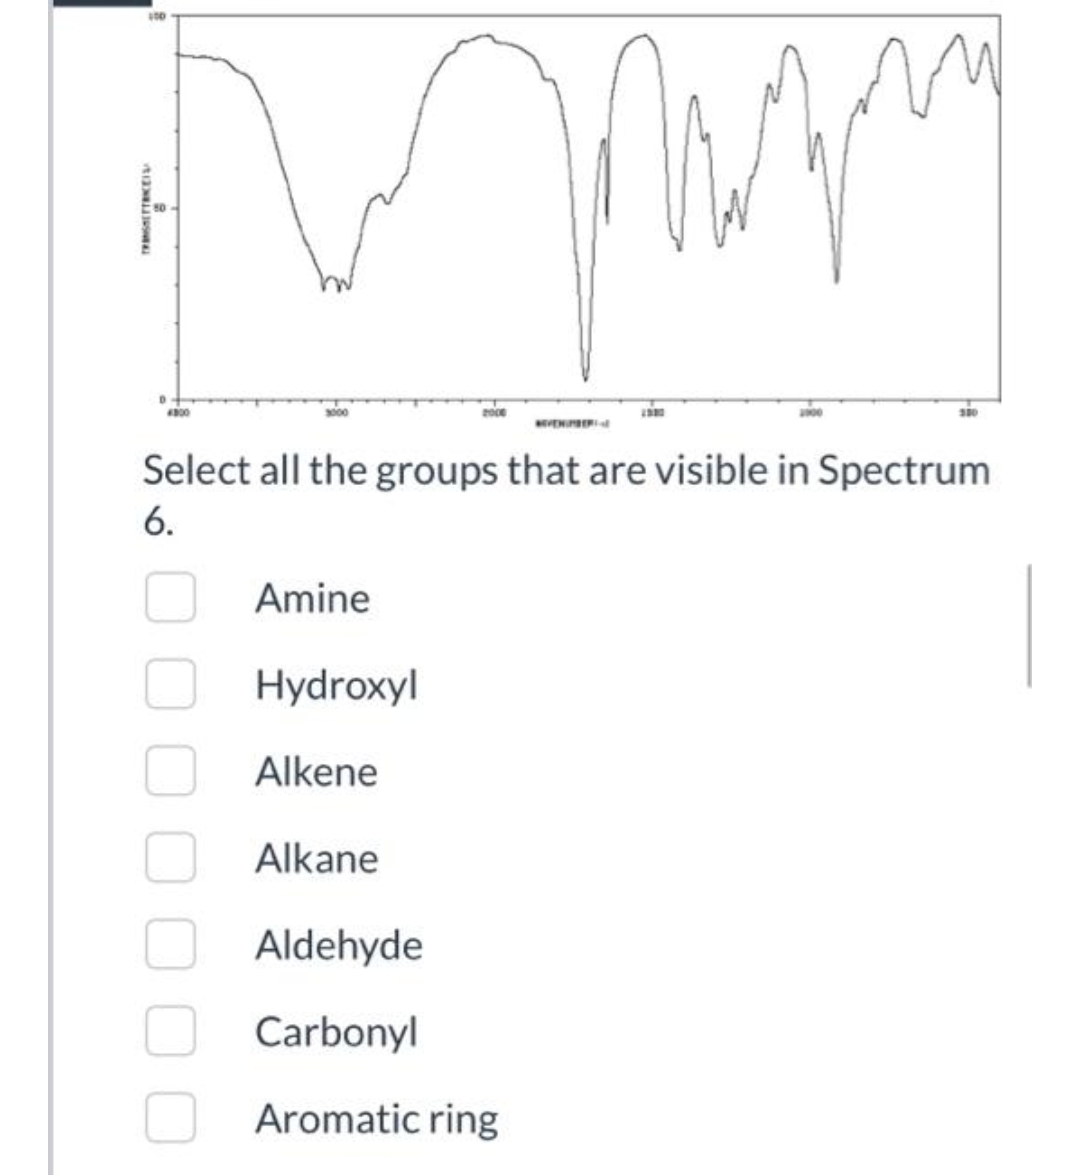 www
4800
2006
Select all the groups that are visible in Spectrum
6.
Amine
Hydroxyl
Alkene
Alkane
Aldehyde
Carbonyl
Aromatic ring
TRANGERES